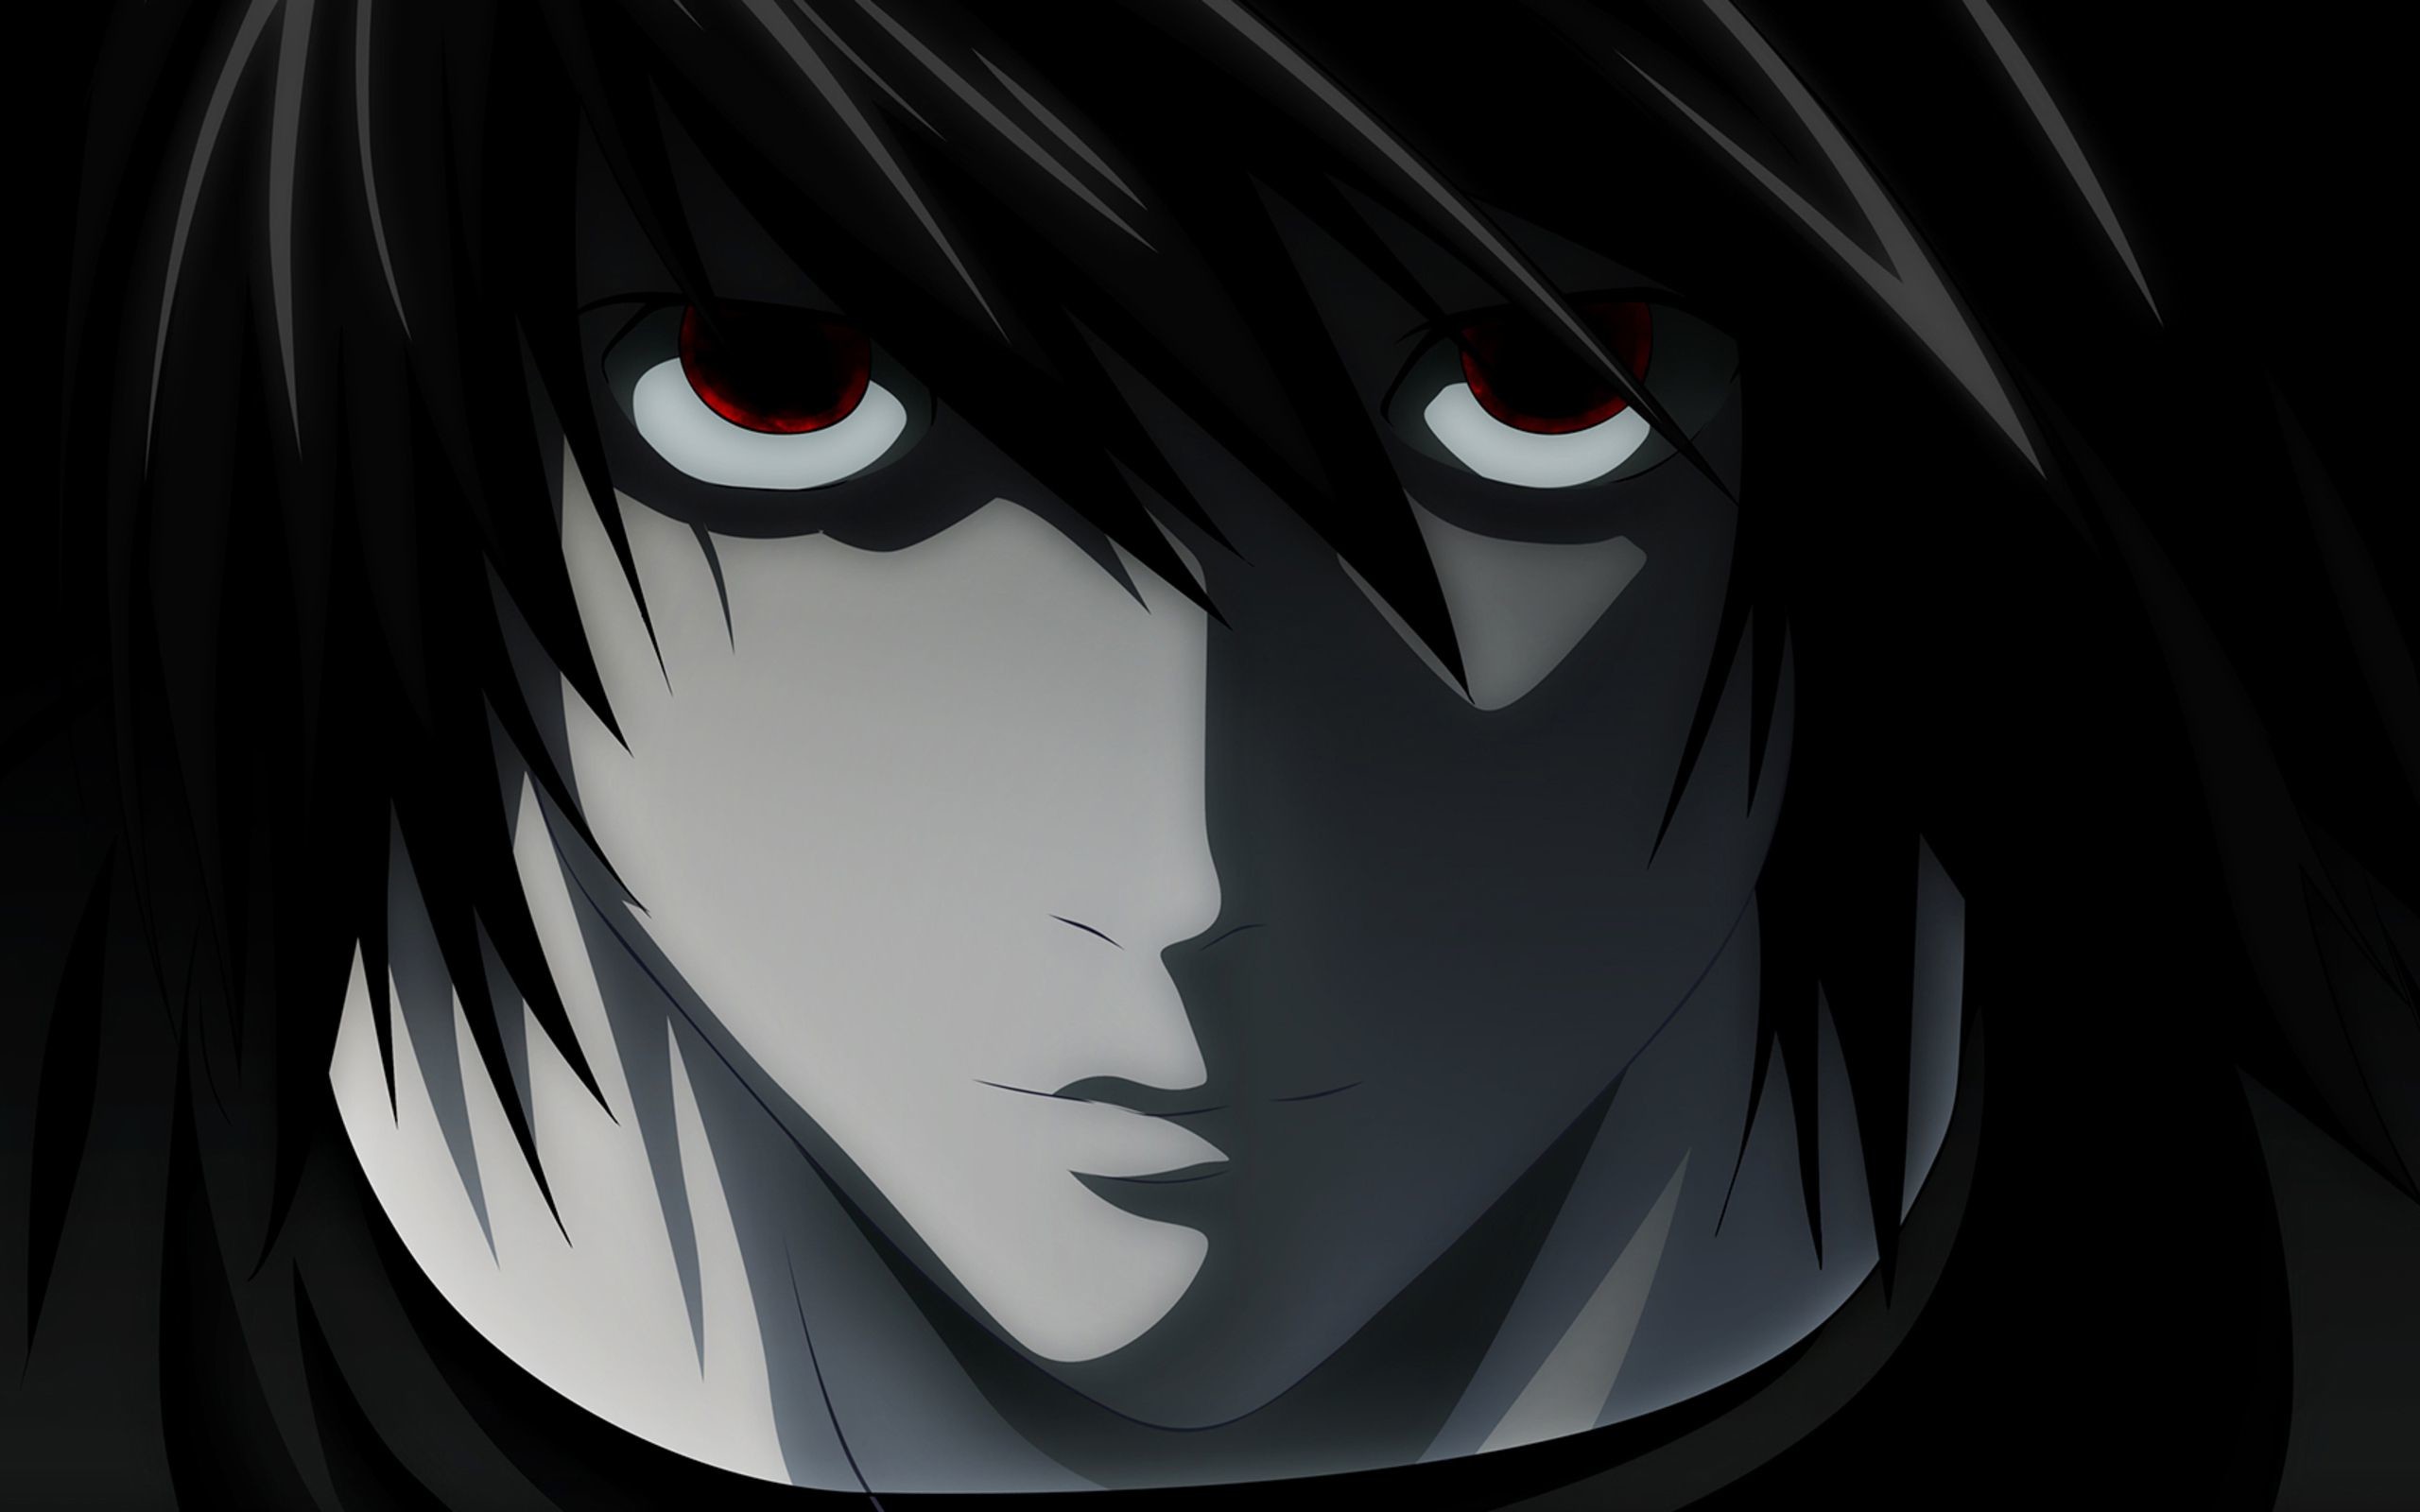 death note full series free download